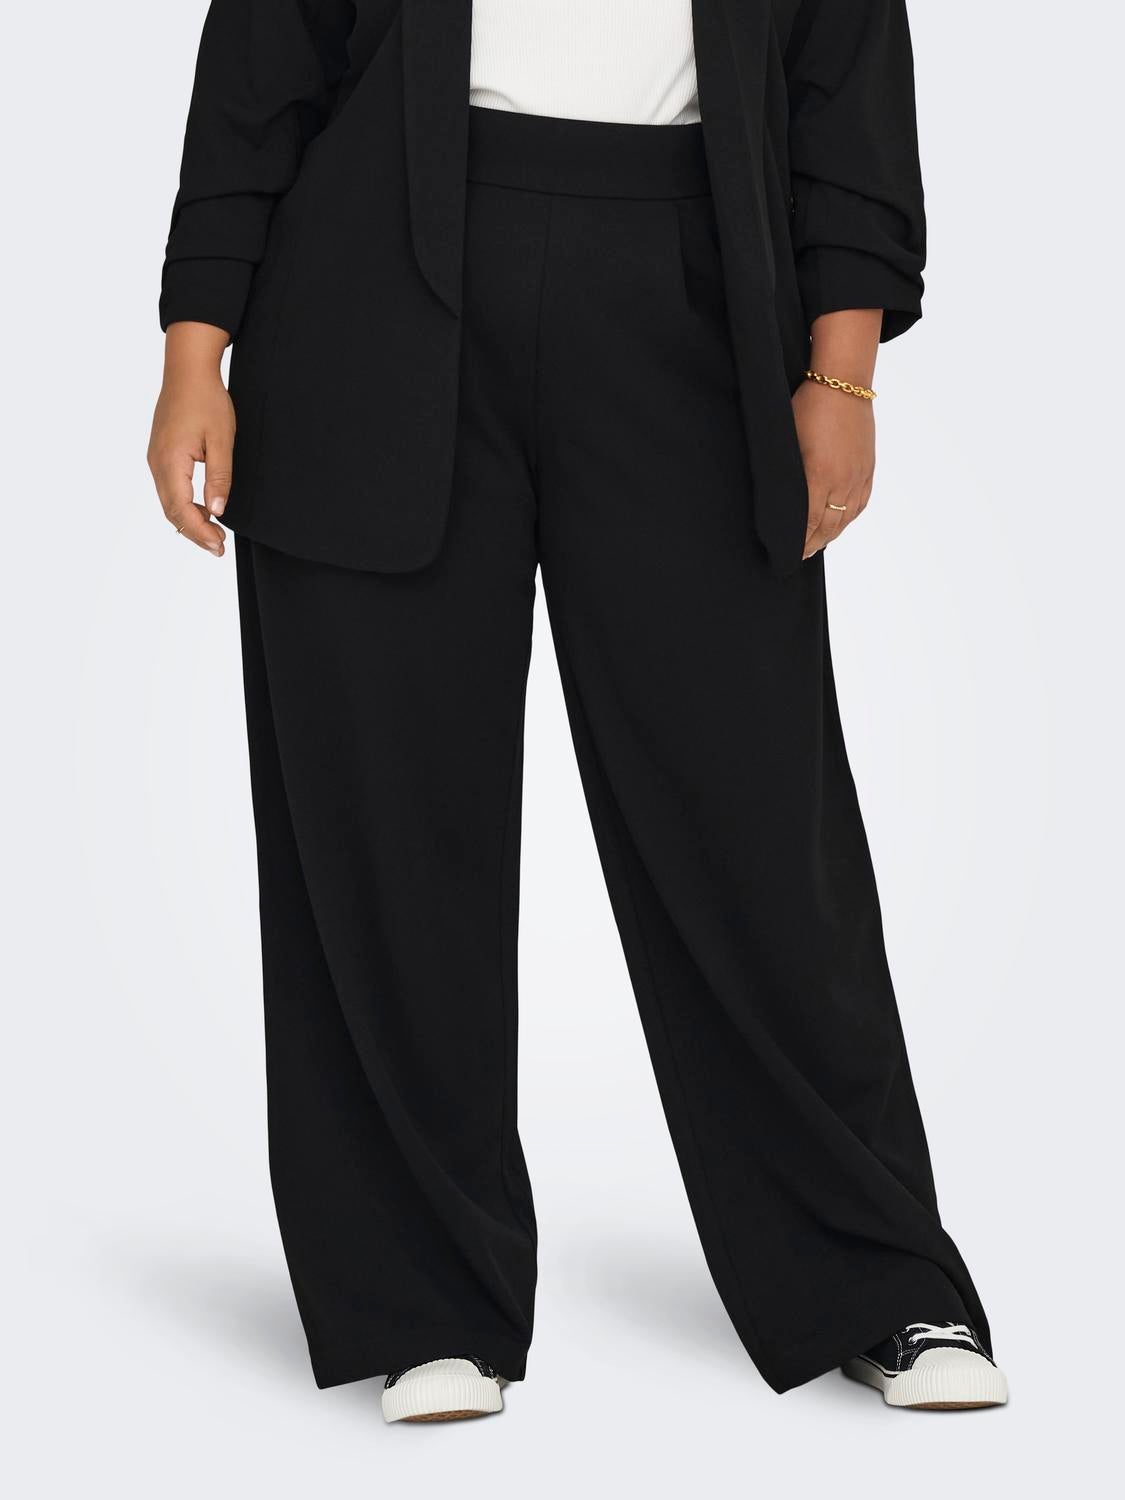 10 Best Plus-Size Black Work Pants For Women 2023 The Strategist |  lupon.gov.ph